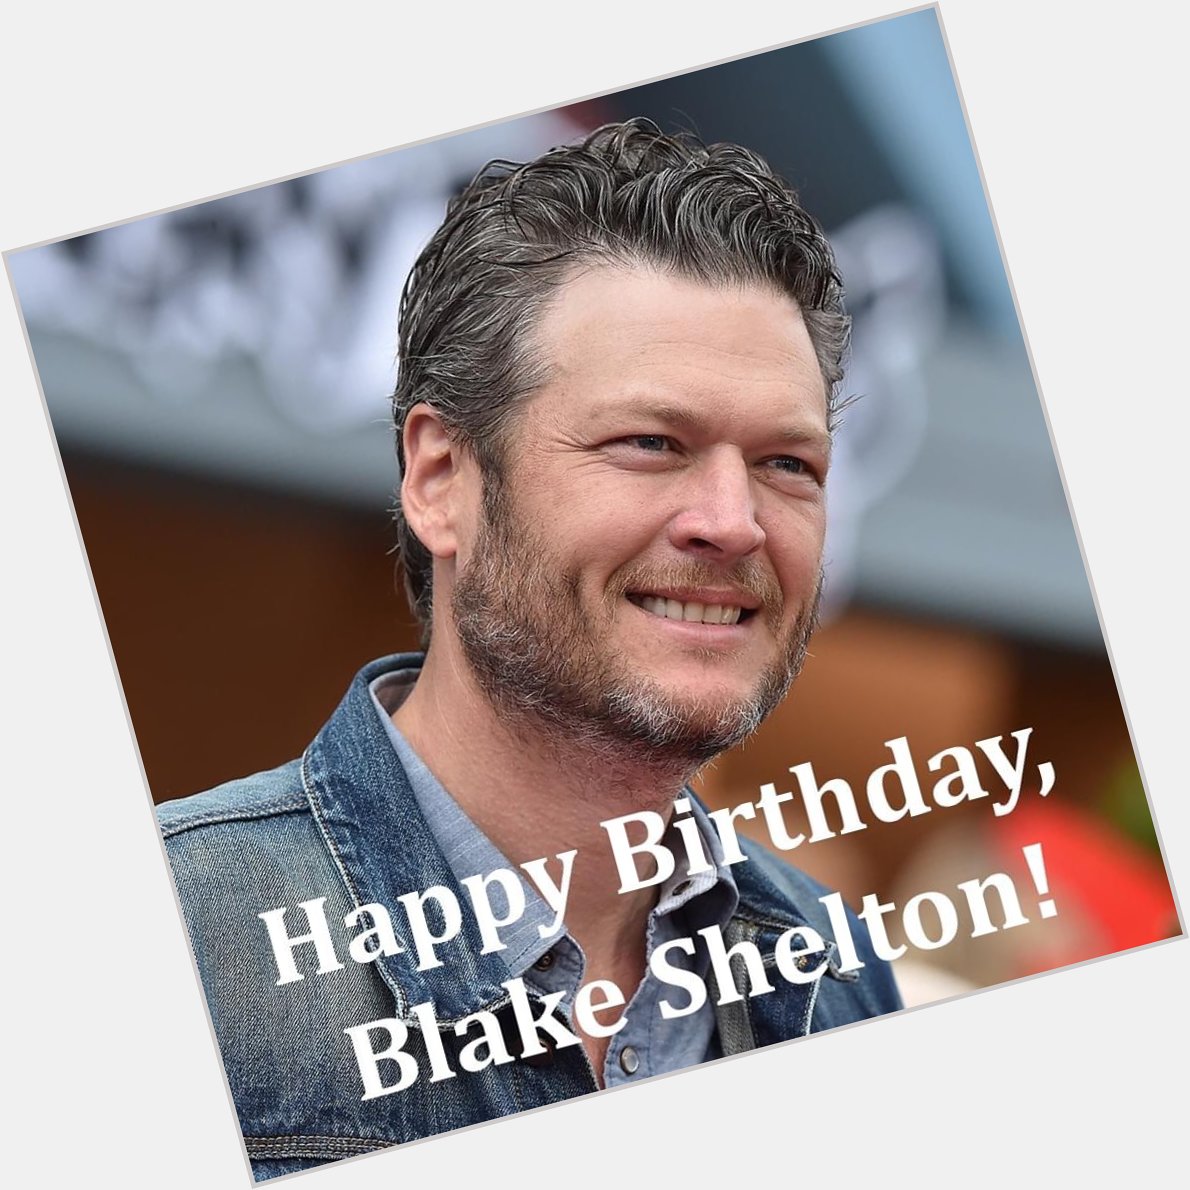 Happy Birthday, Blake Shelton ! The country music star and television personality is 44 years old today 